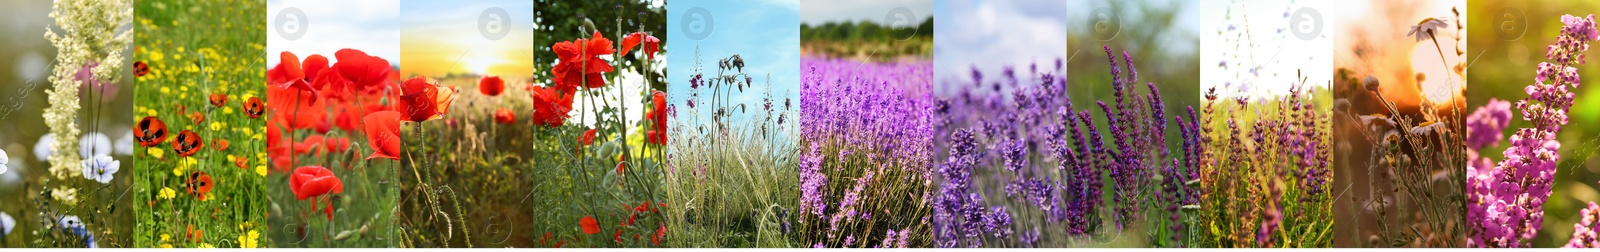 Image of Collage with photos of different beautiful wild flowers